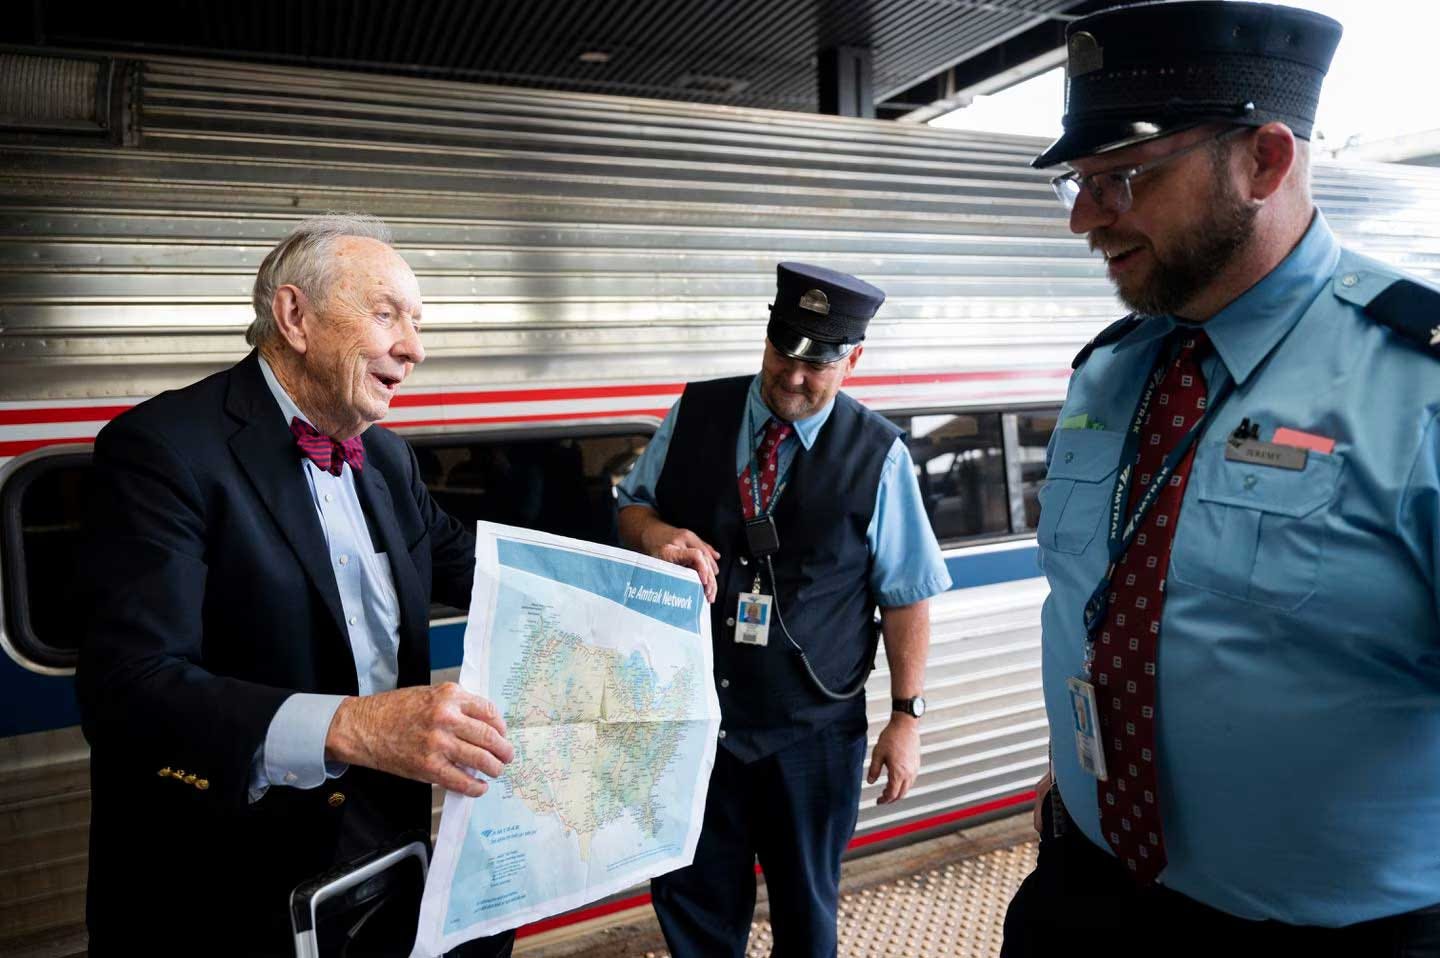 Older man holds an Amtrak map next to a train in the station while speaking with two Amtrak conductors.